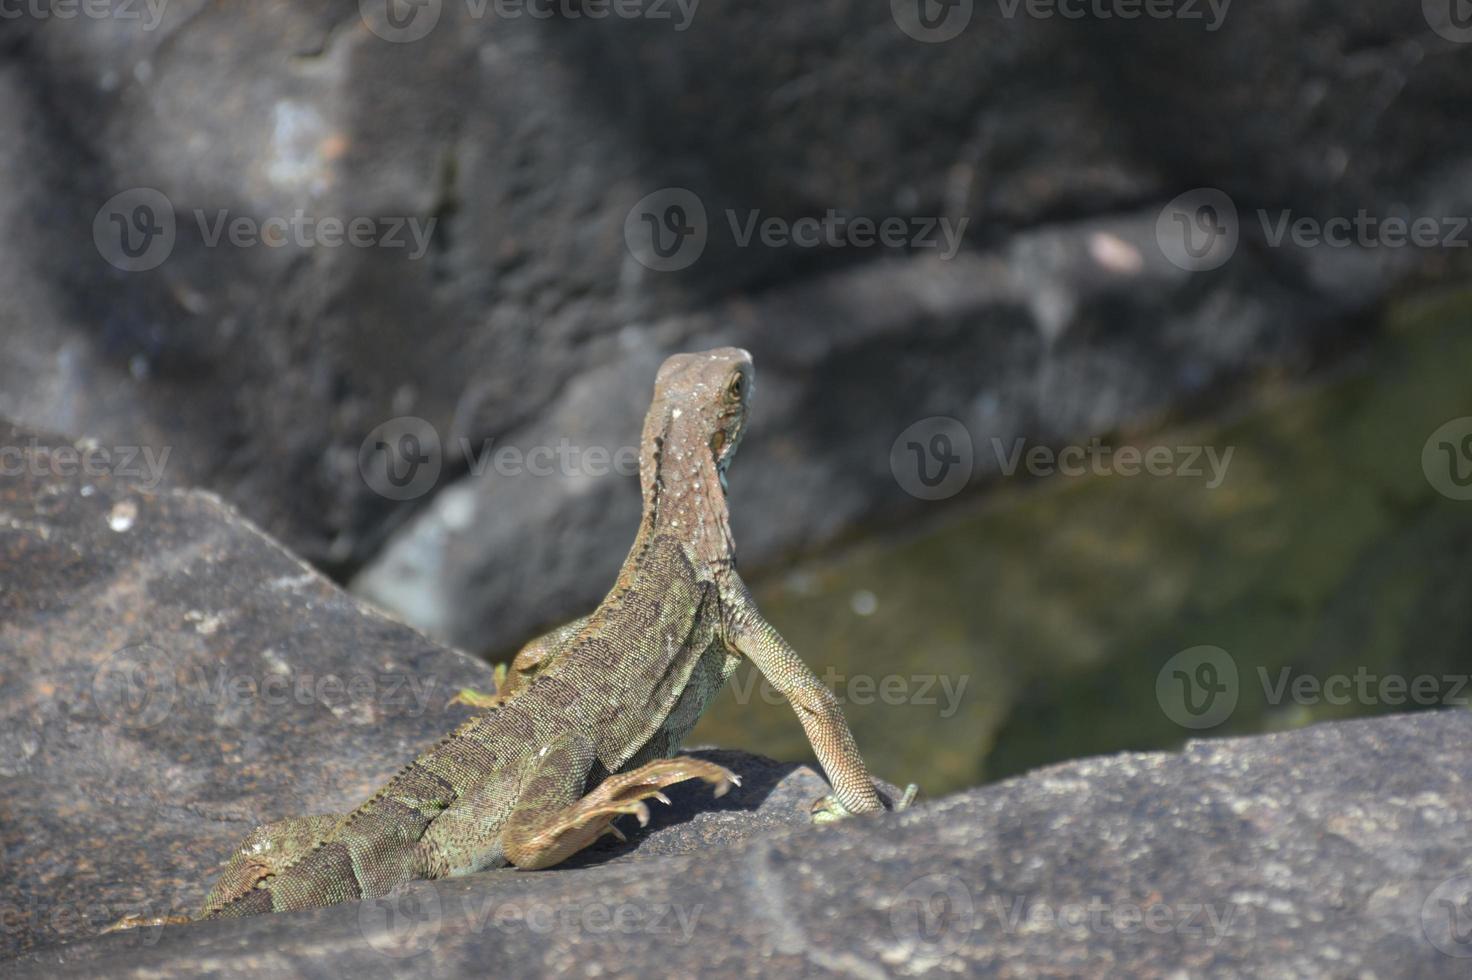 Iguana Gazing Off Into the Distance from a Rock photo